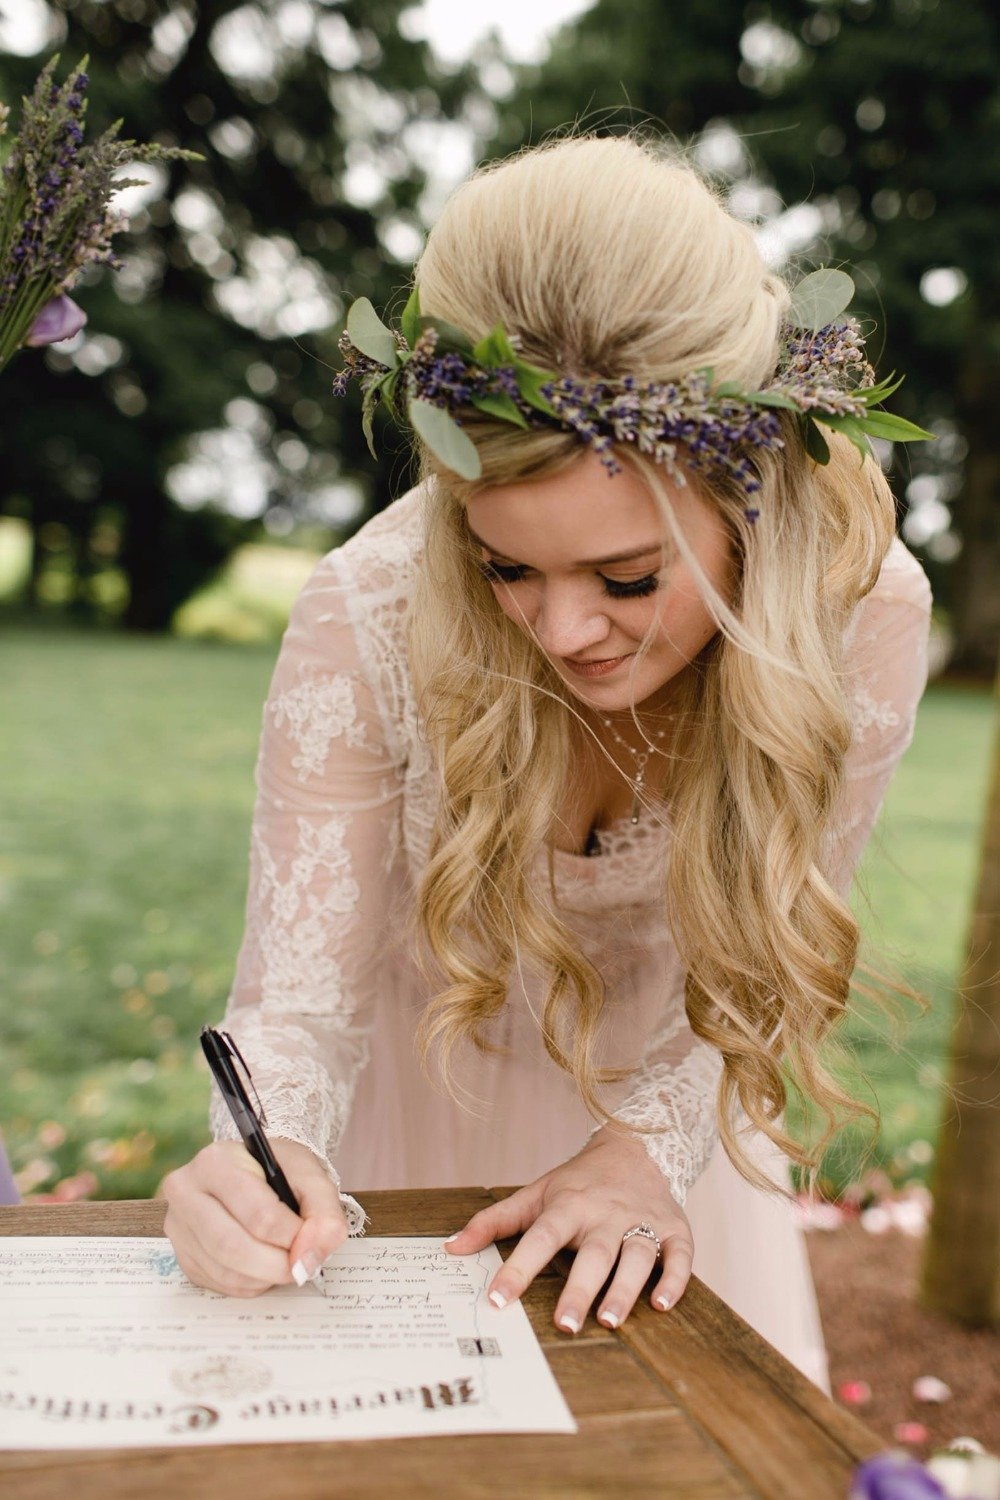 Beautiful wedding hair and floral crown